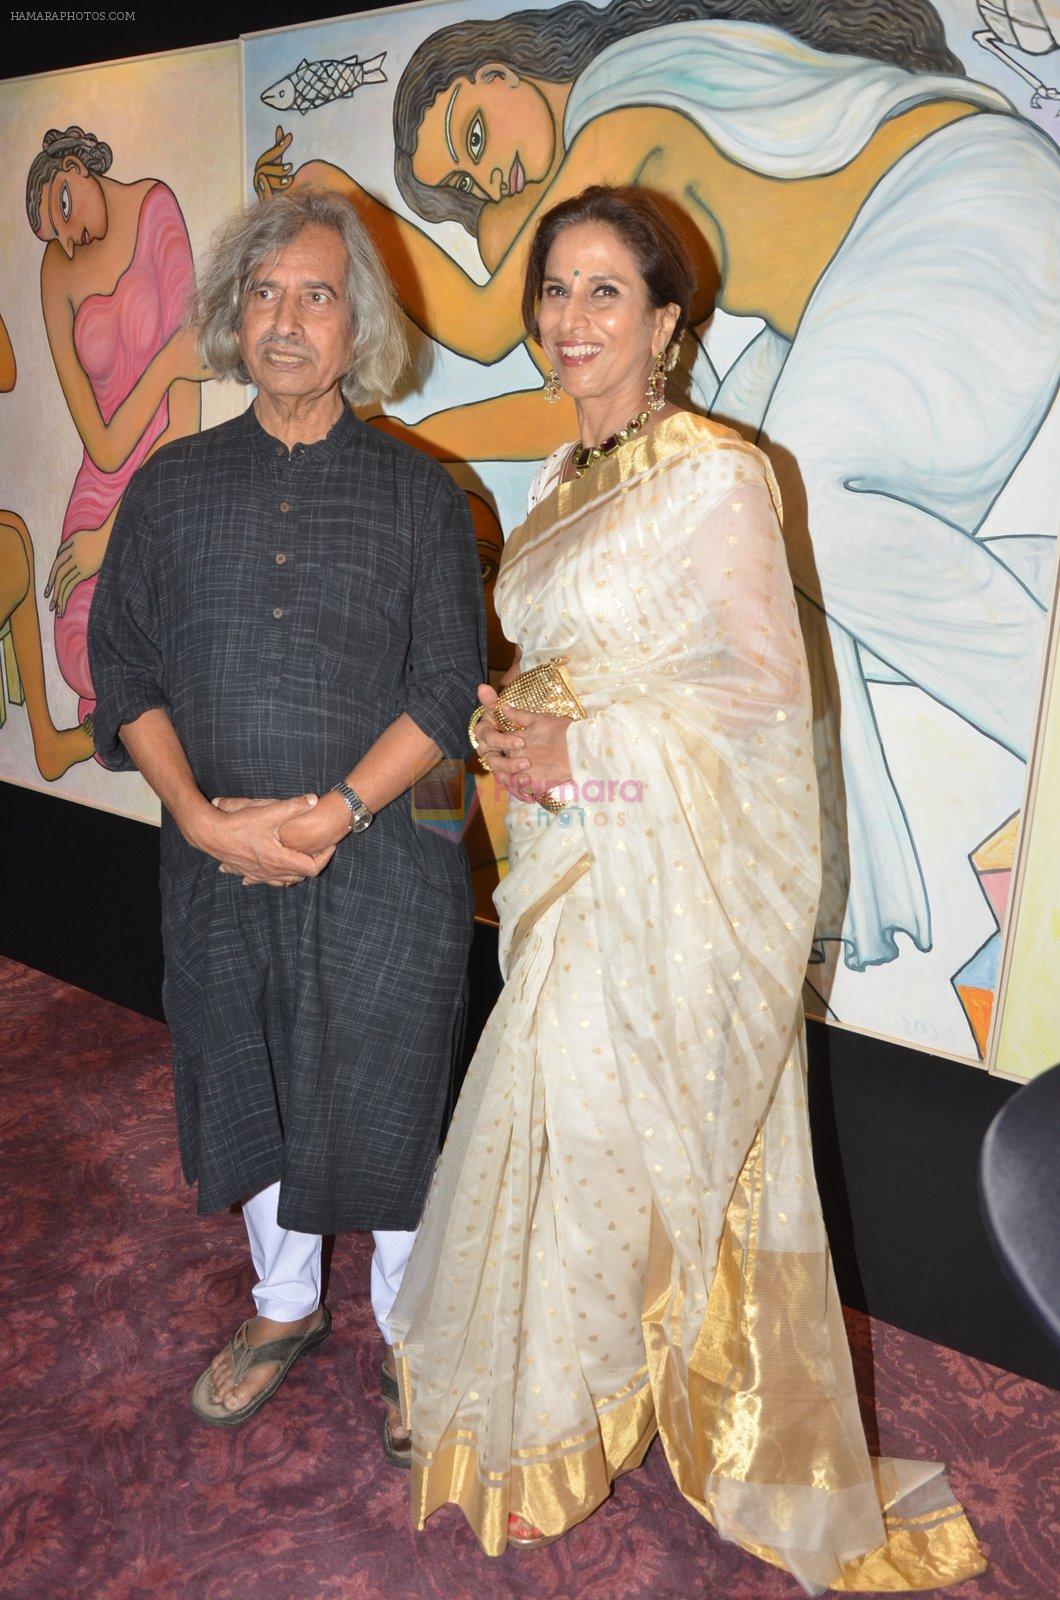 Shobhaa De at Jogen Chaudhry's art event hosted by Gayatri Ruia and ST Regis on 10th June 2016